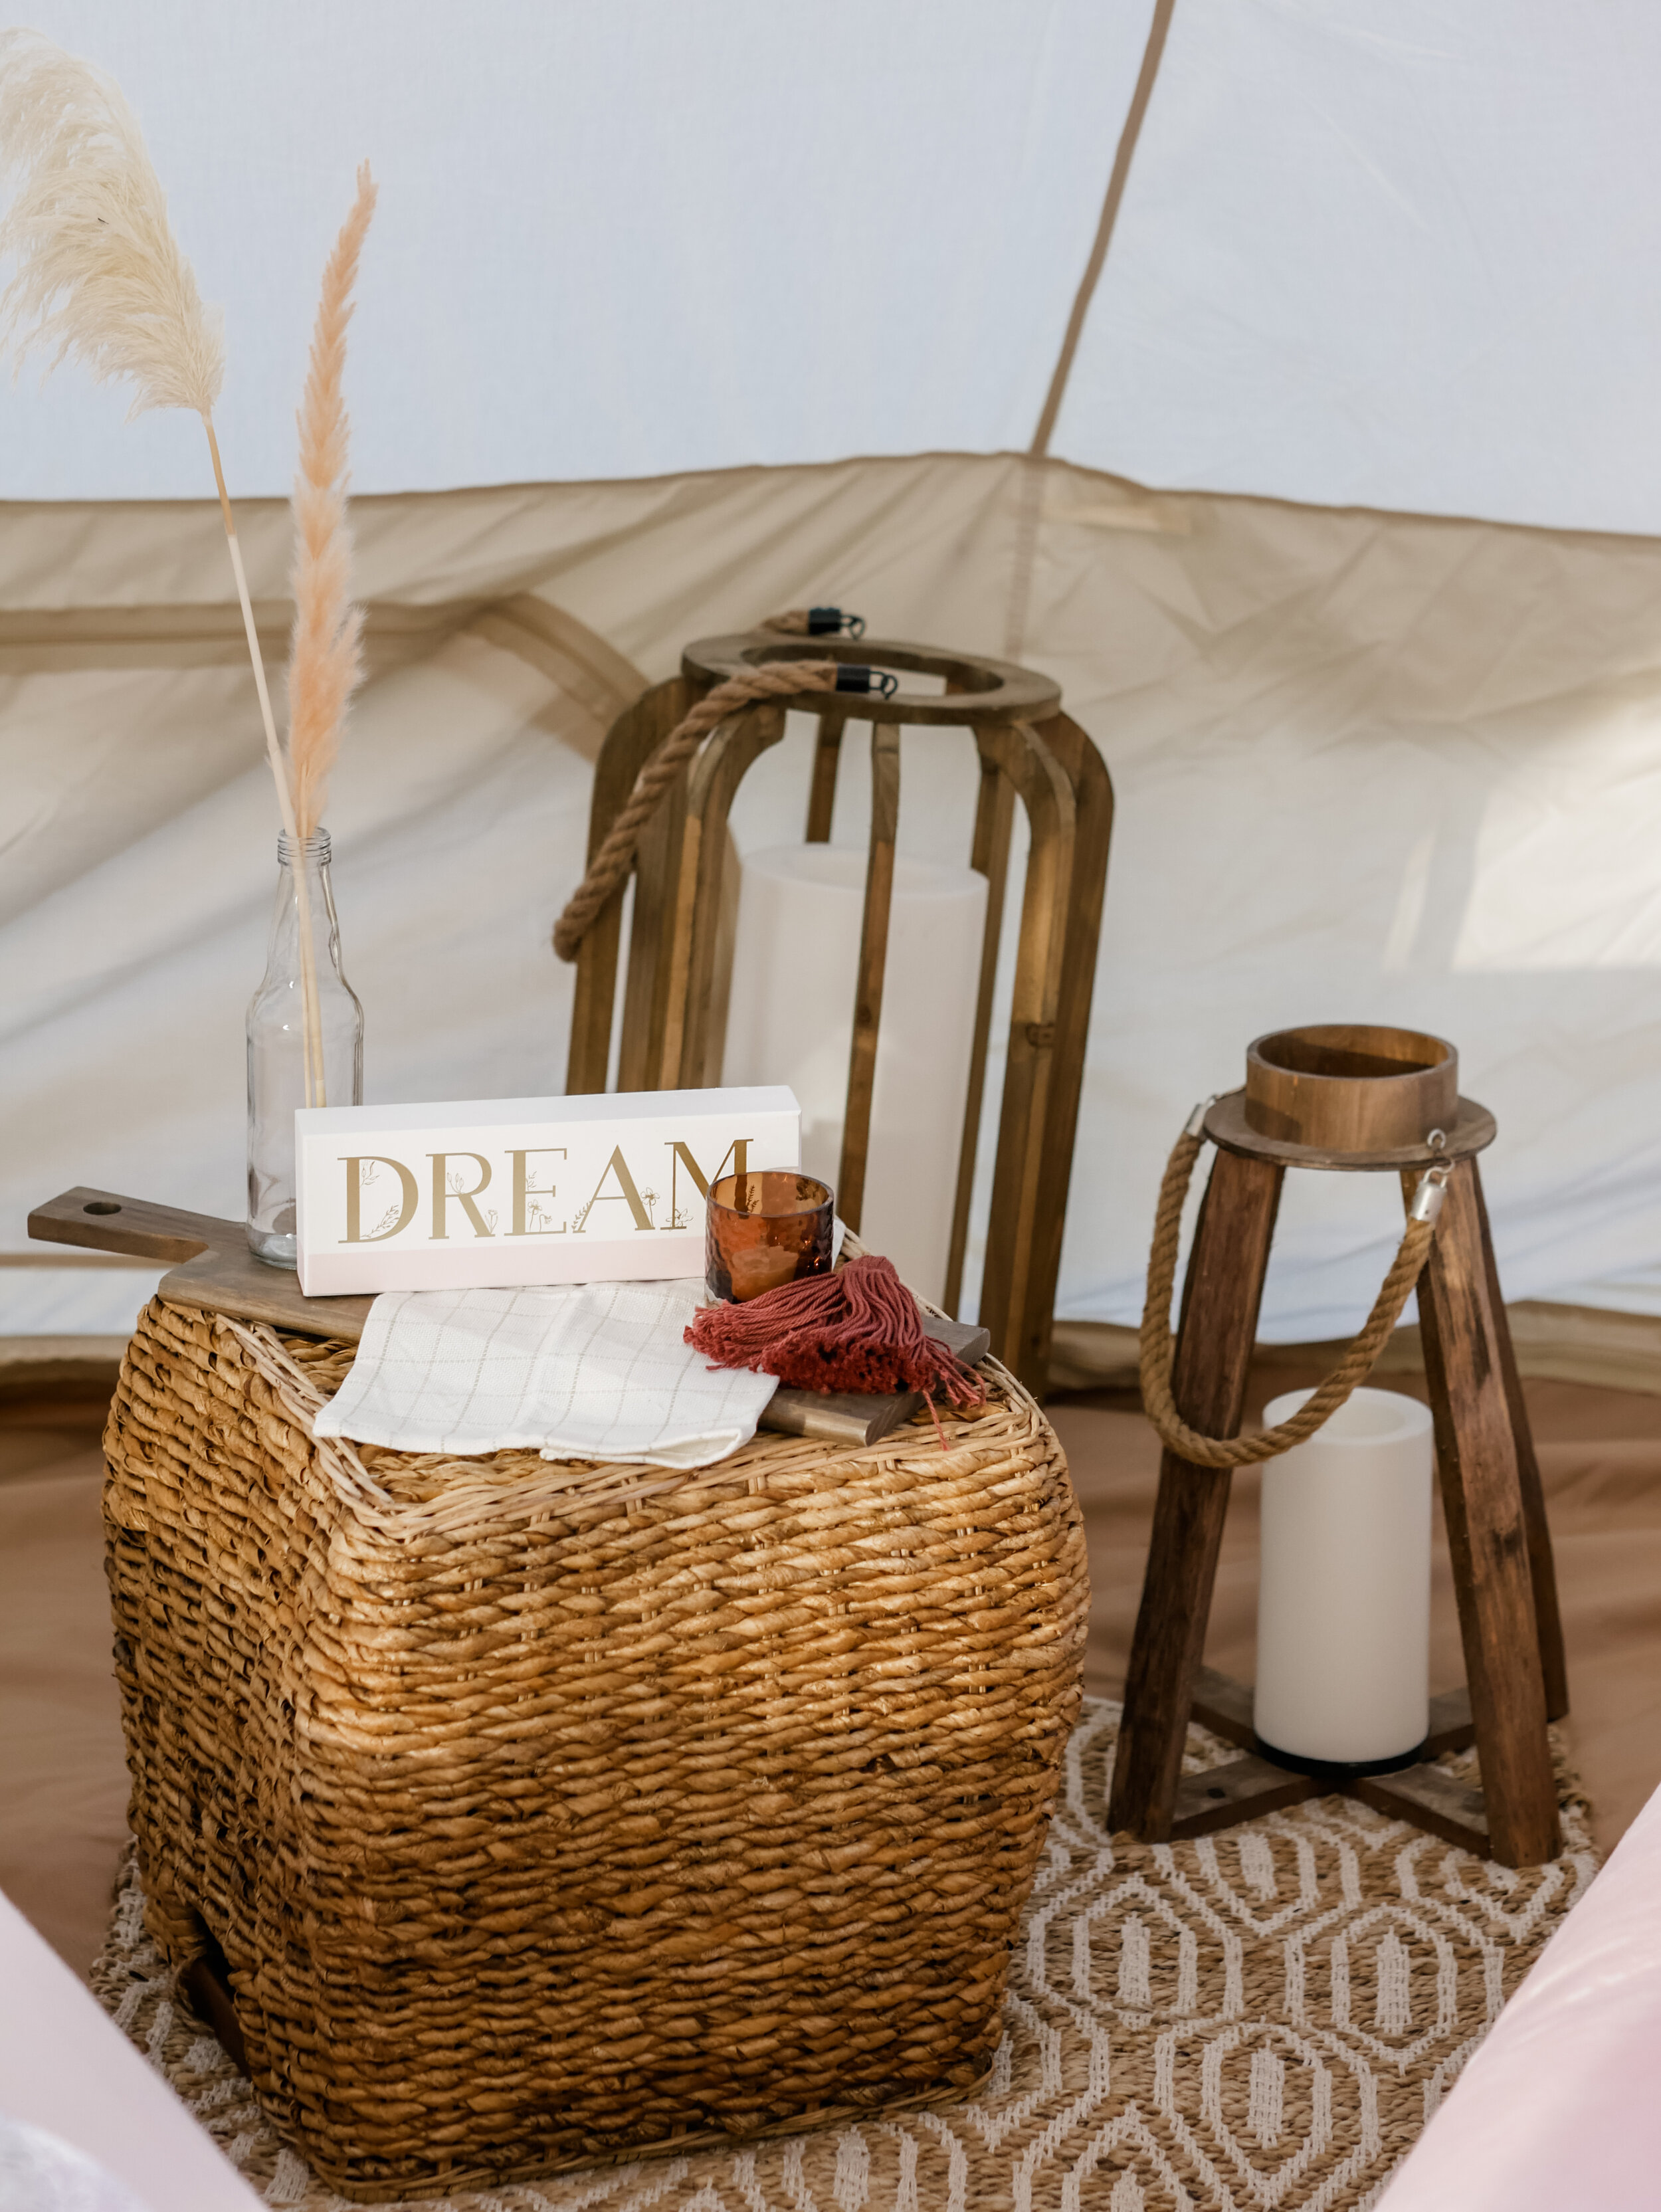  Boho Chic luxury backyard Glamping experience - with large rentable tent and picnic area from MINT Event Design in Austin, TX! Perfect for teen slumber parties, birthday parties, or bachelorette parties. See how event designer Carolina set up a boho